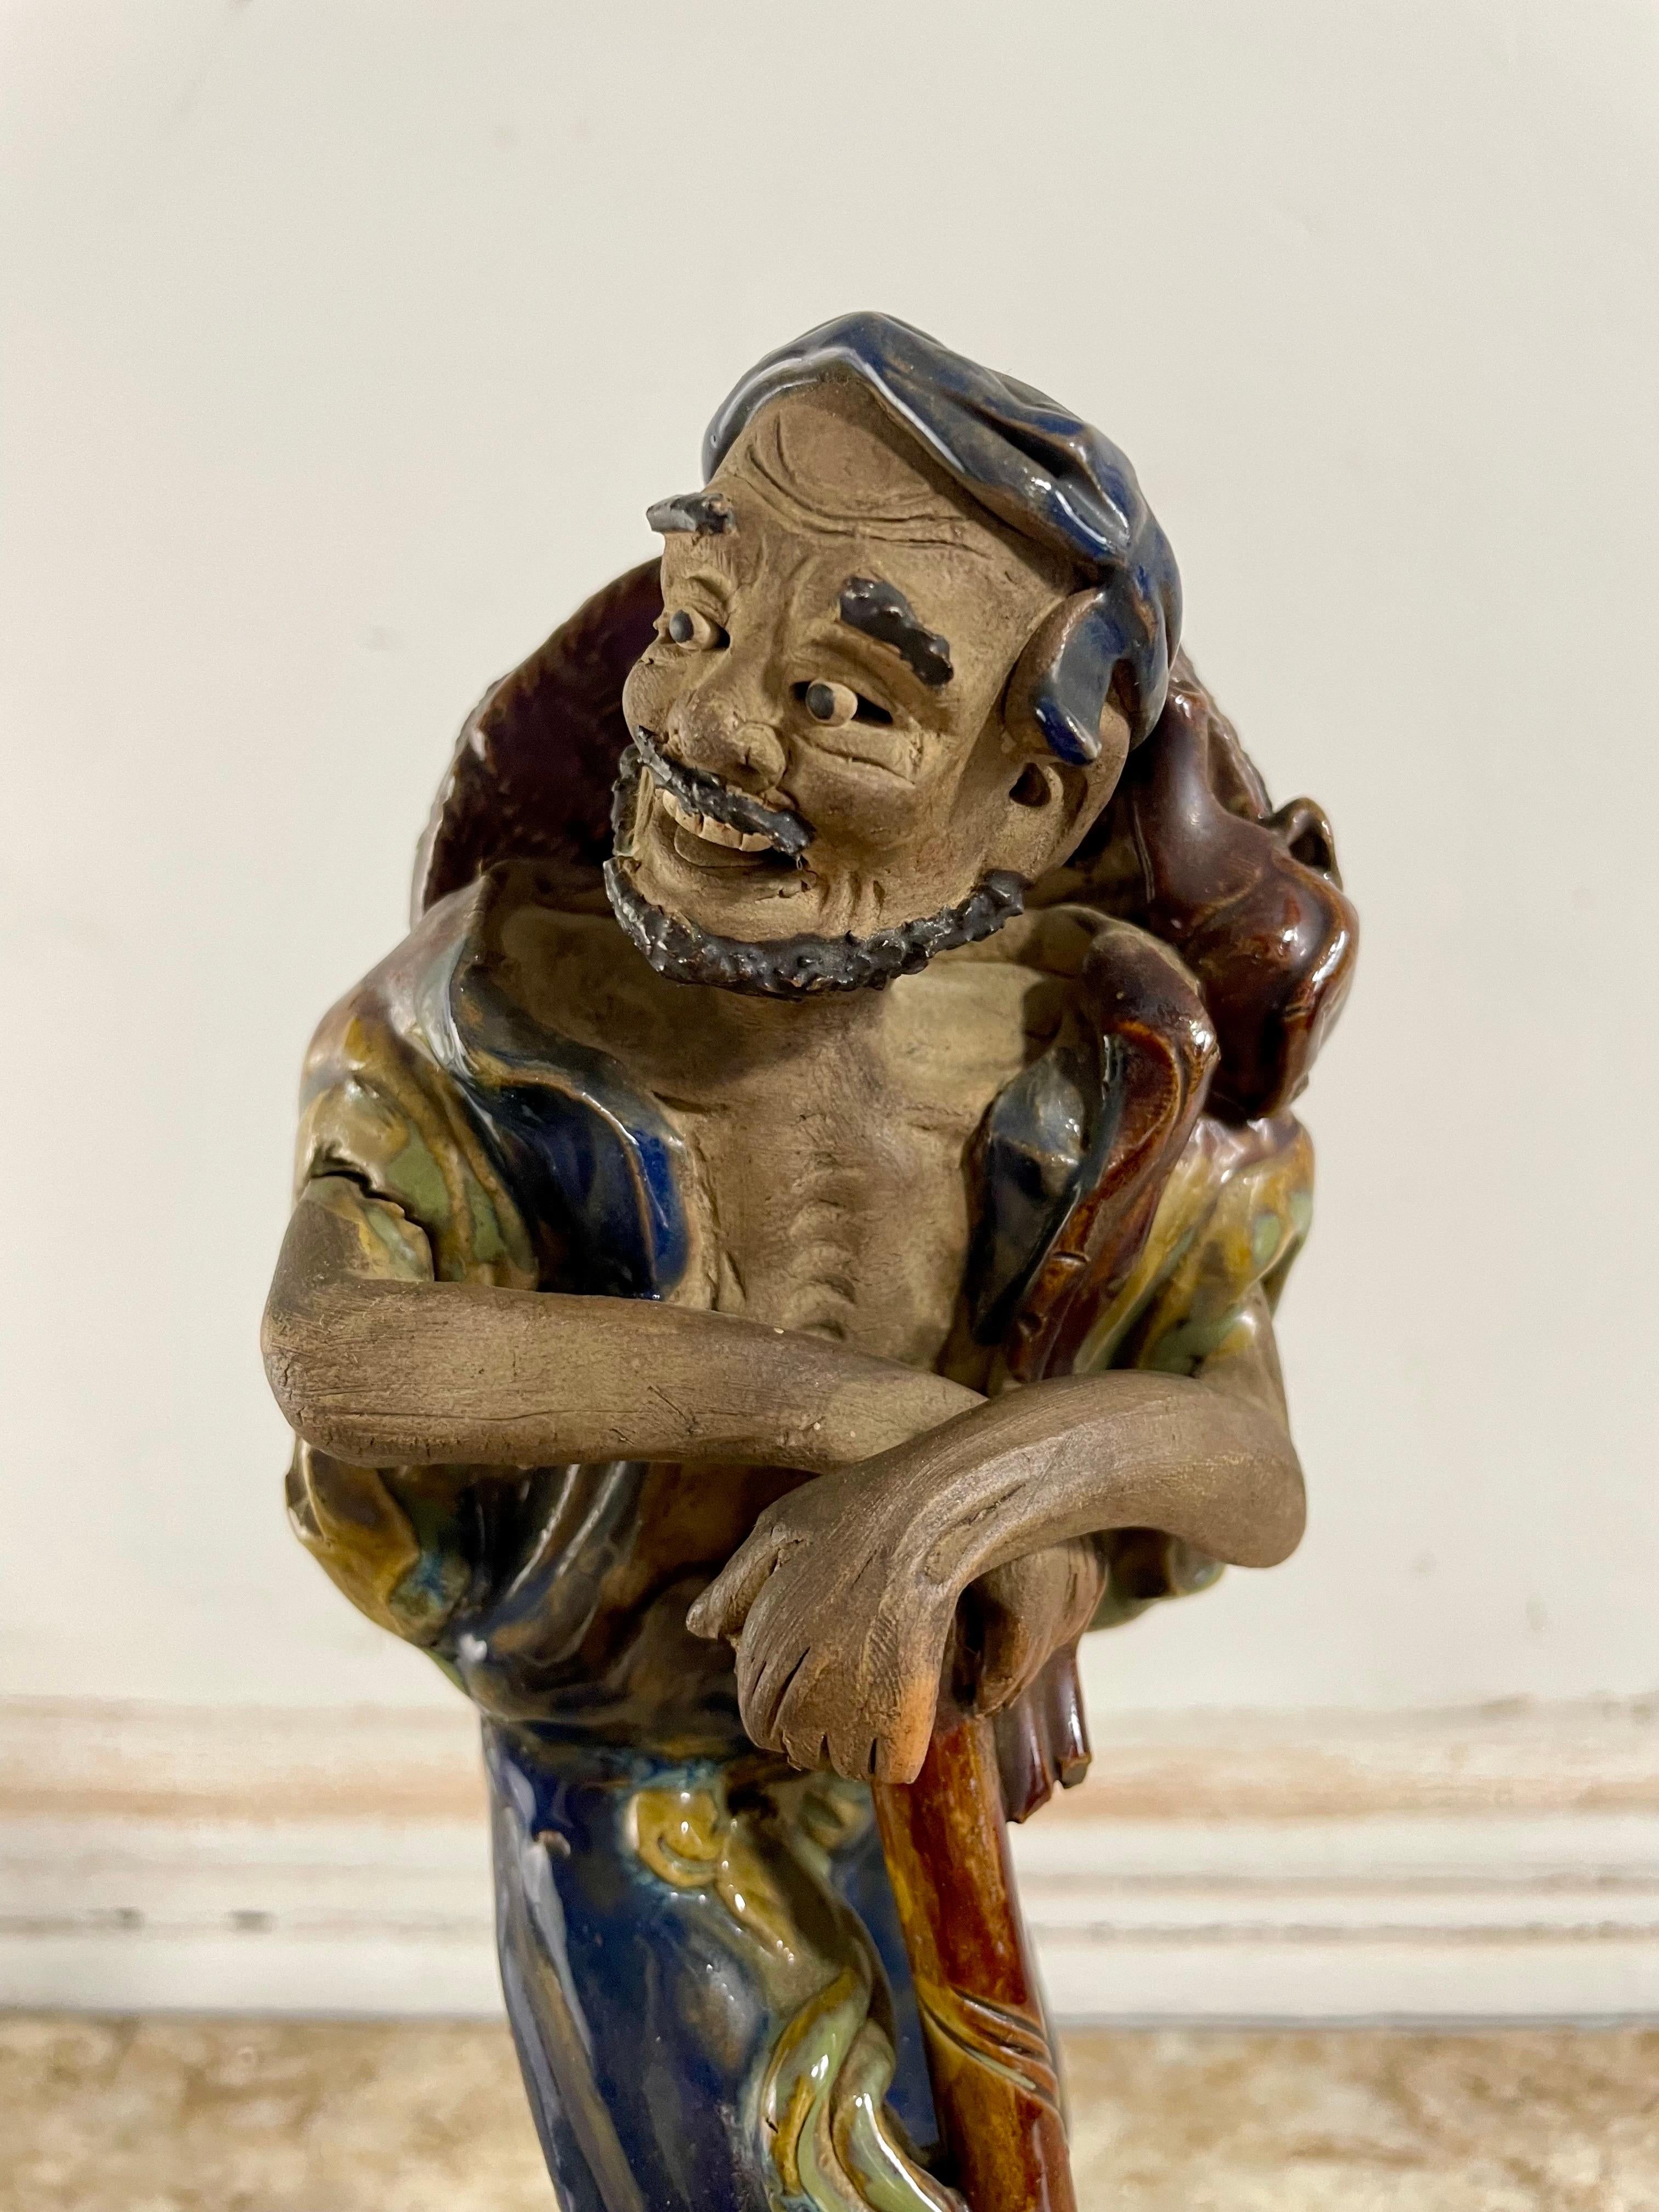 Ceramic statuette from Shiwan partially glazed in yellow and blue representing Li Tieguai standing leaning on a stick, his hat behind his back.

Under the foot is still the piece of an old sale label from a XIXth or early XXth shop.
